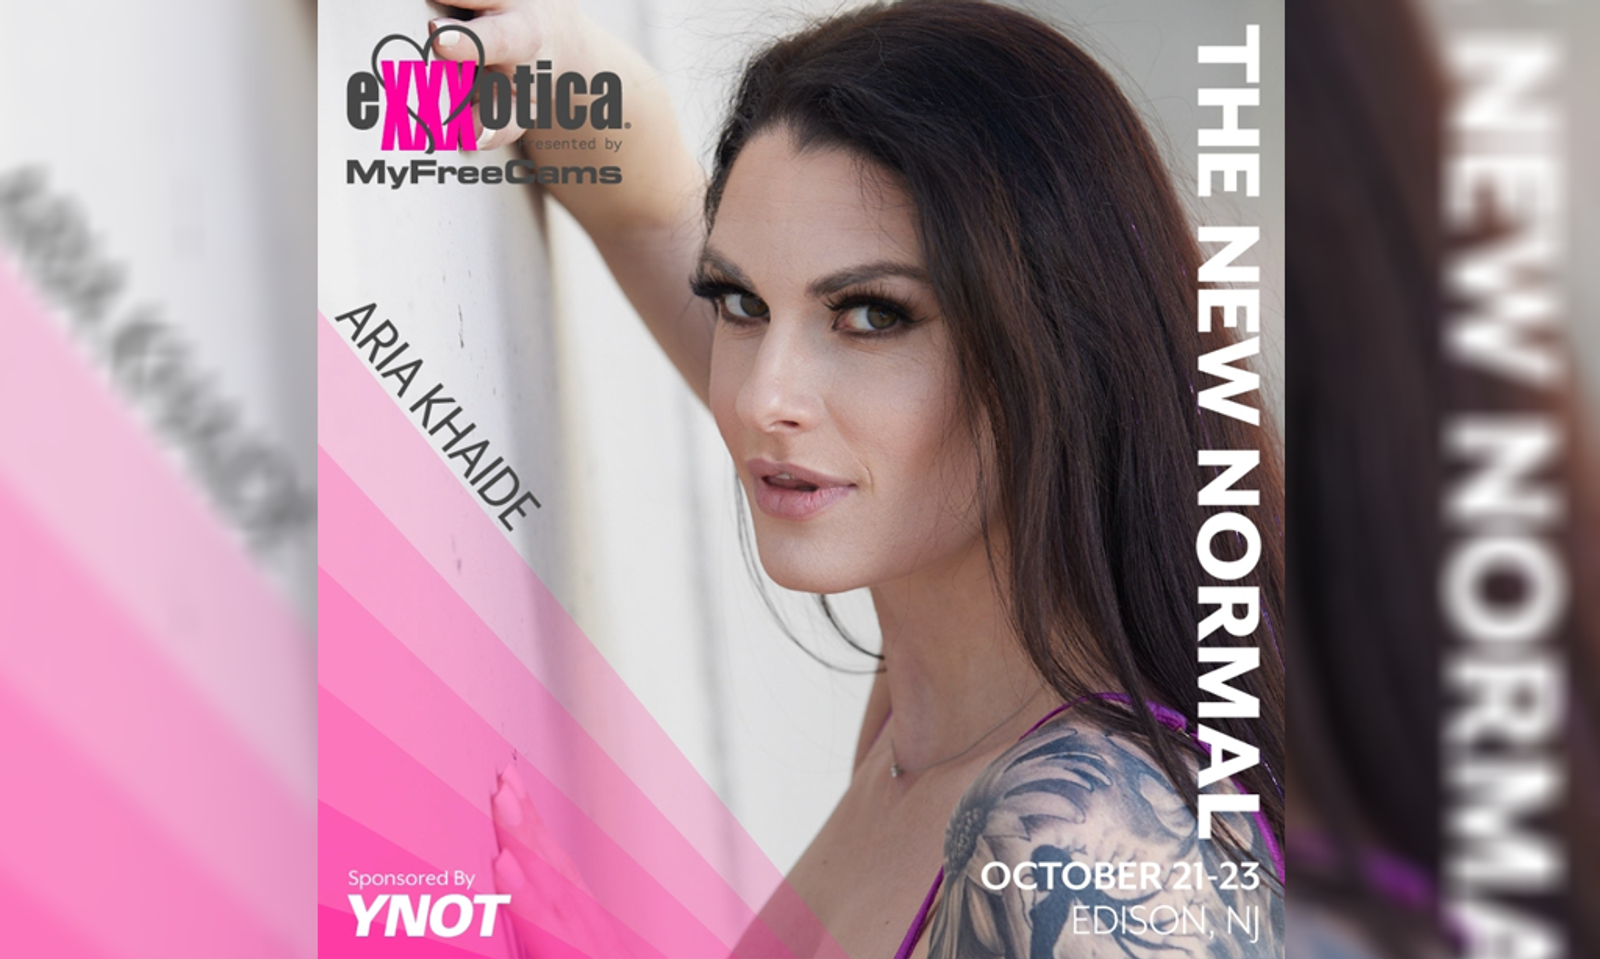 Meet Aria Khaide at Exxxotica New Jersey This Weekend